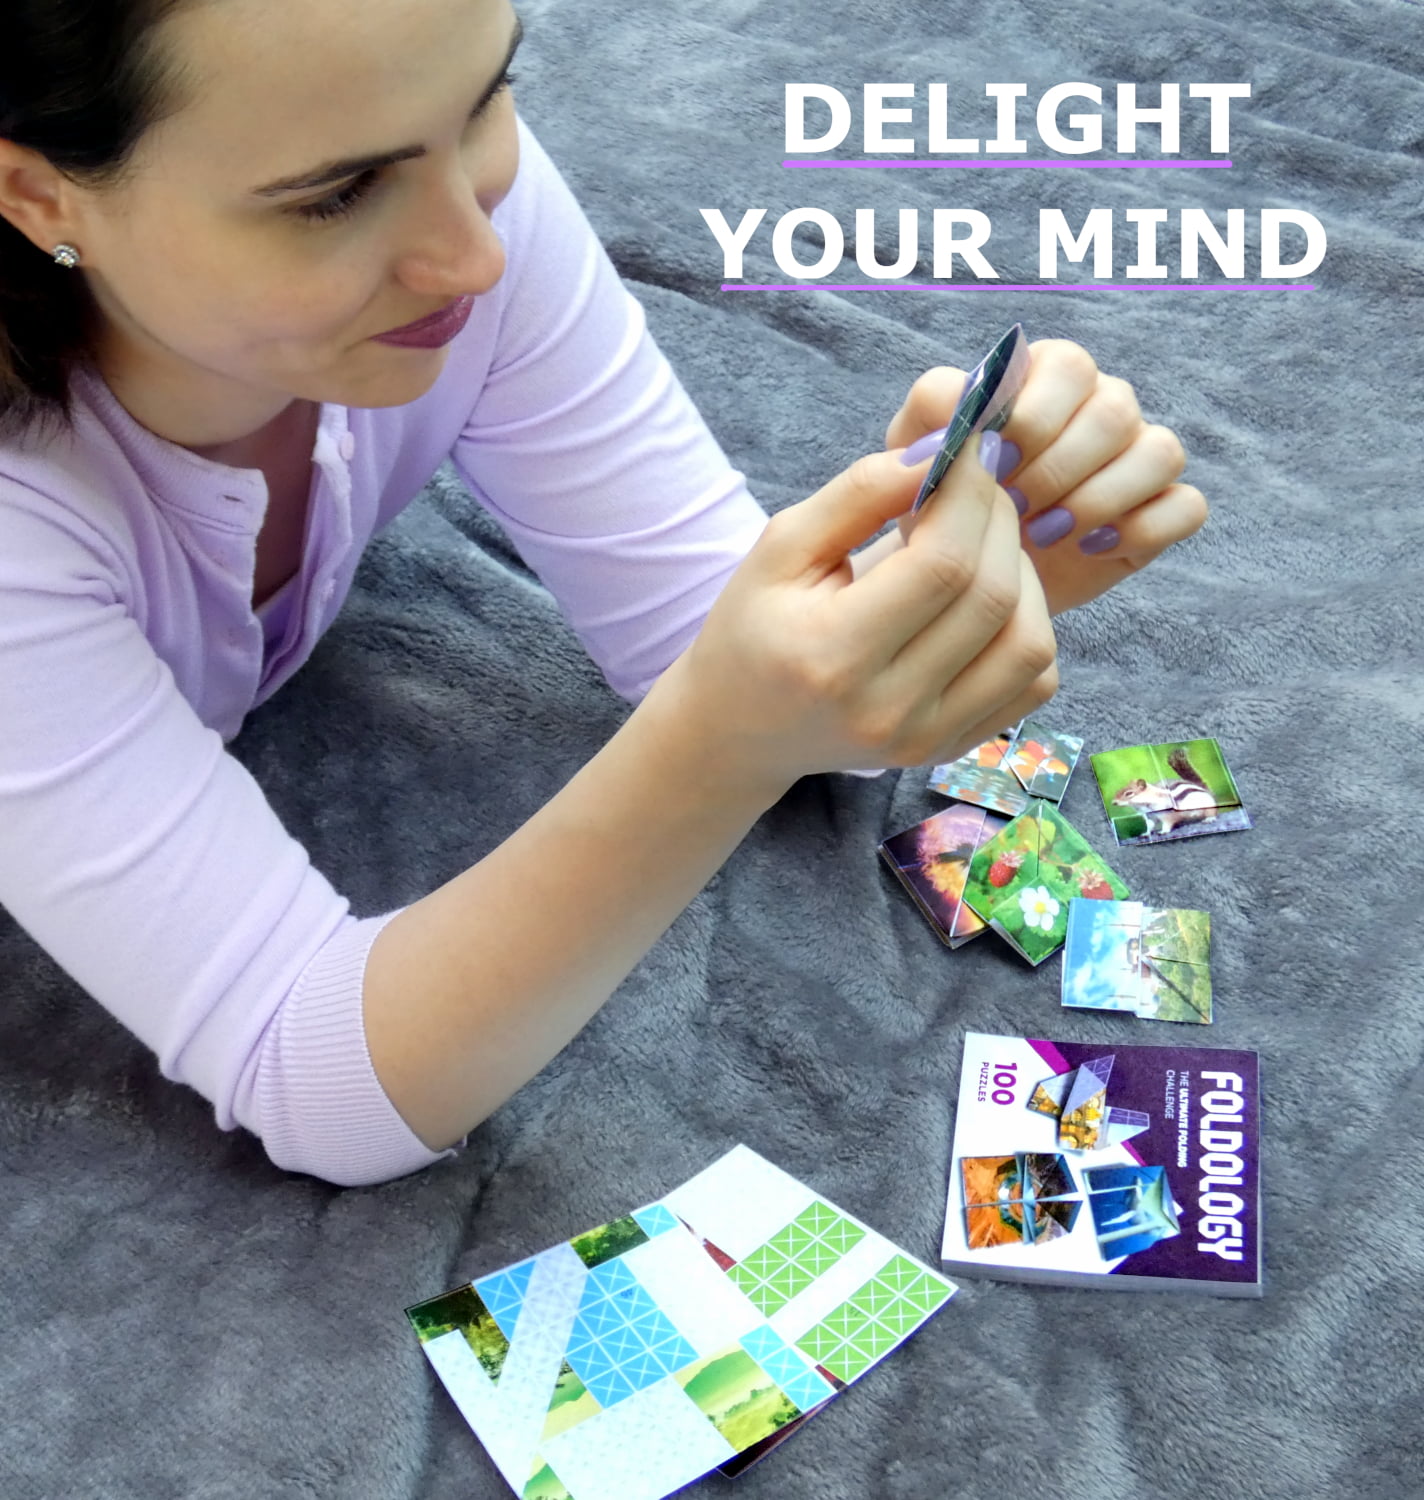 FOLDOLOGY - The Origami Puzzle Game! Hands-On Brain Teasers for Tweens,  Teens & Adults. 100 Challenges 